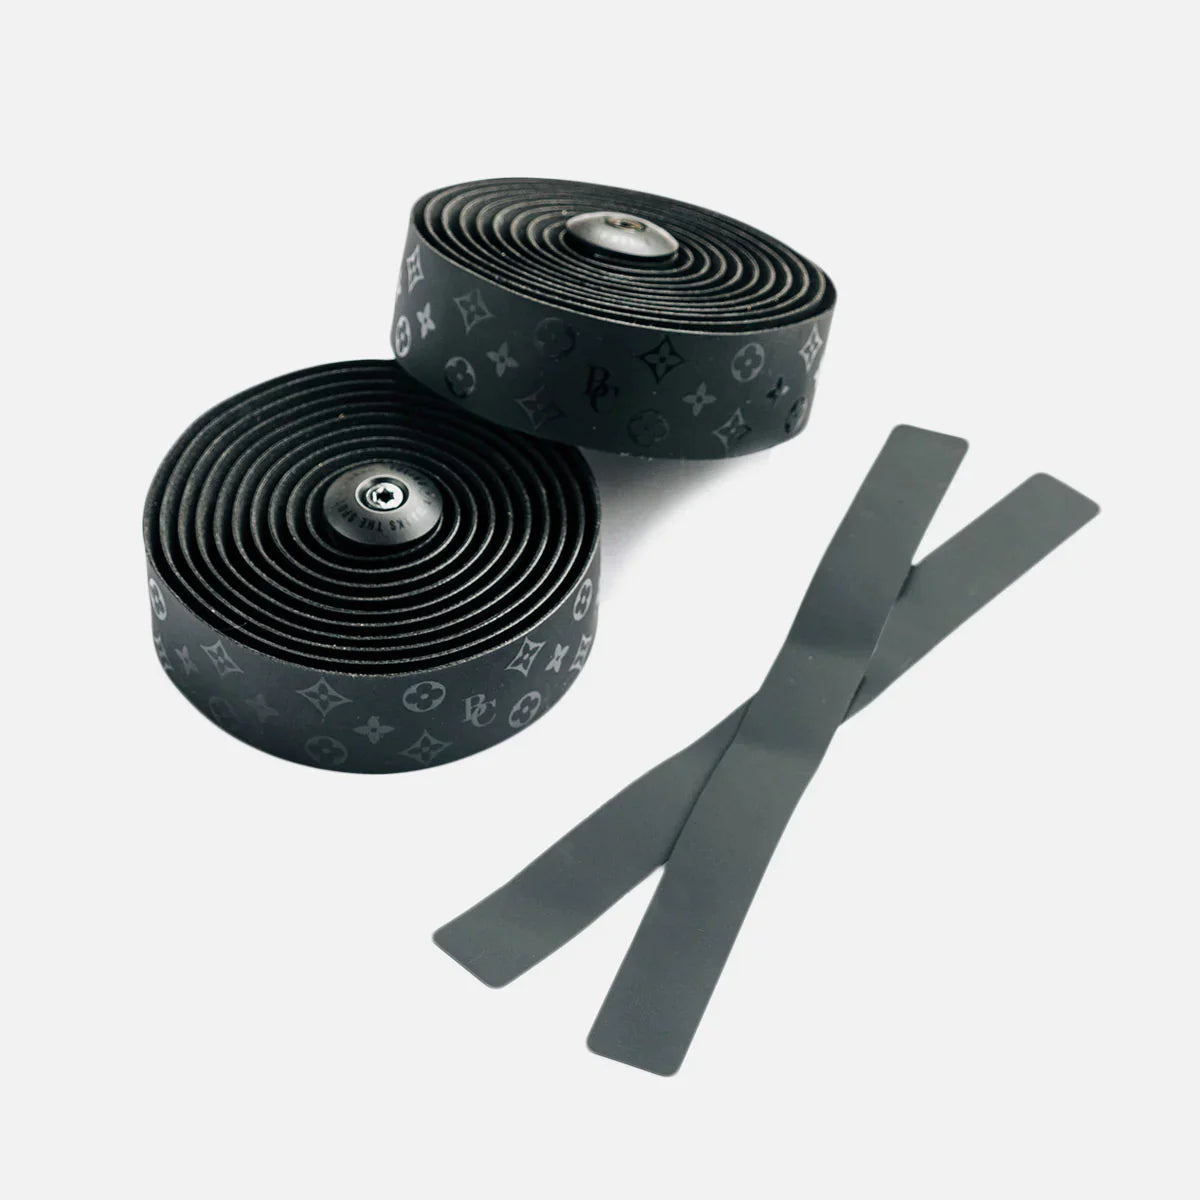 BC-LV Stealth Bar Tape Tough meets chic with the Burgh BC-LV